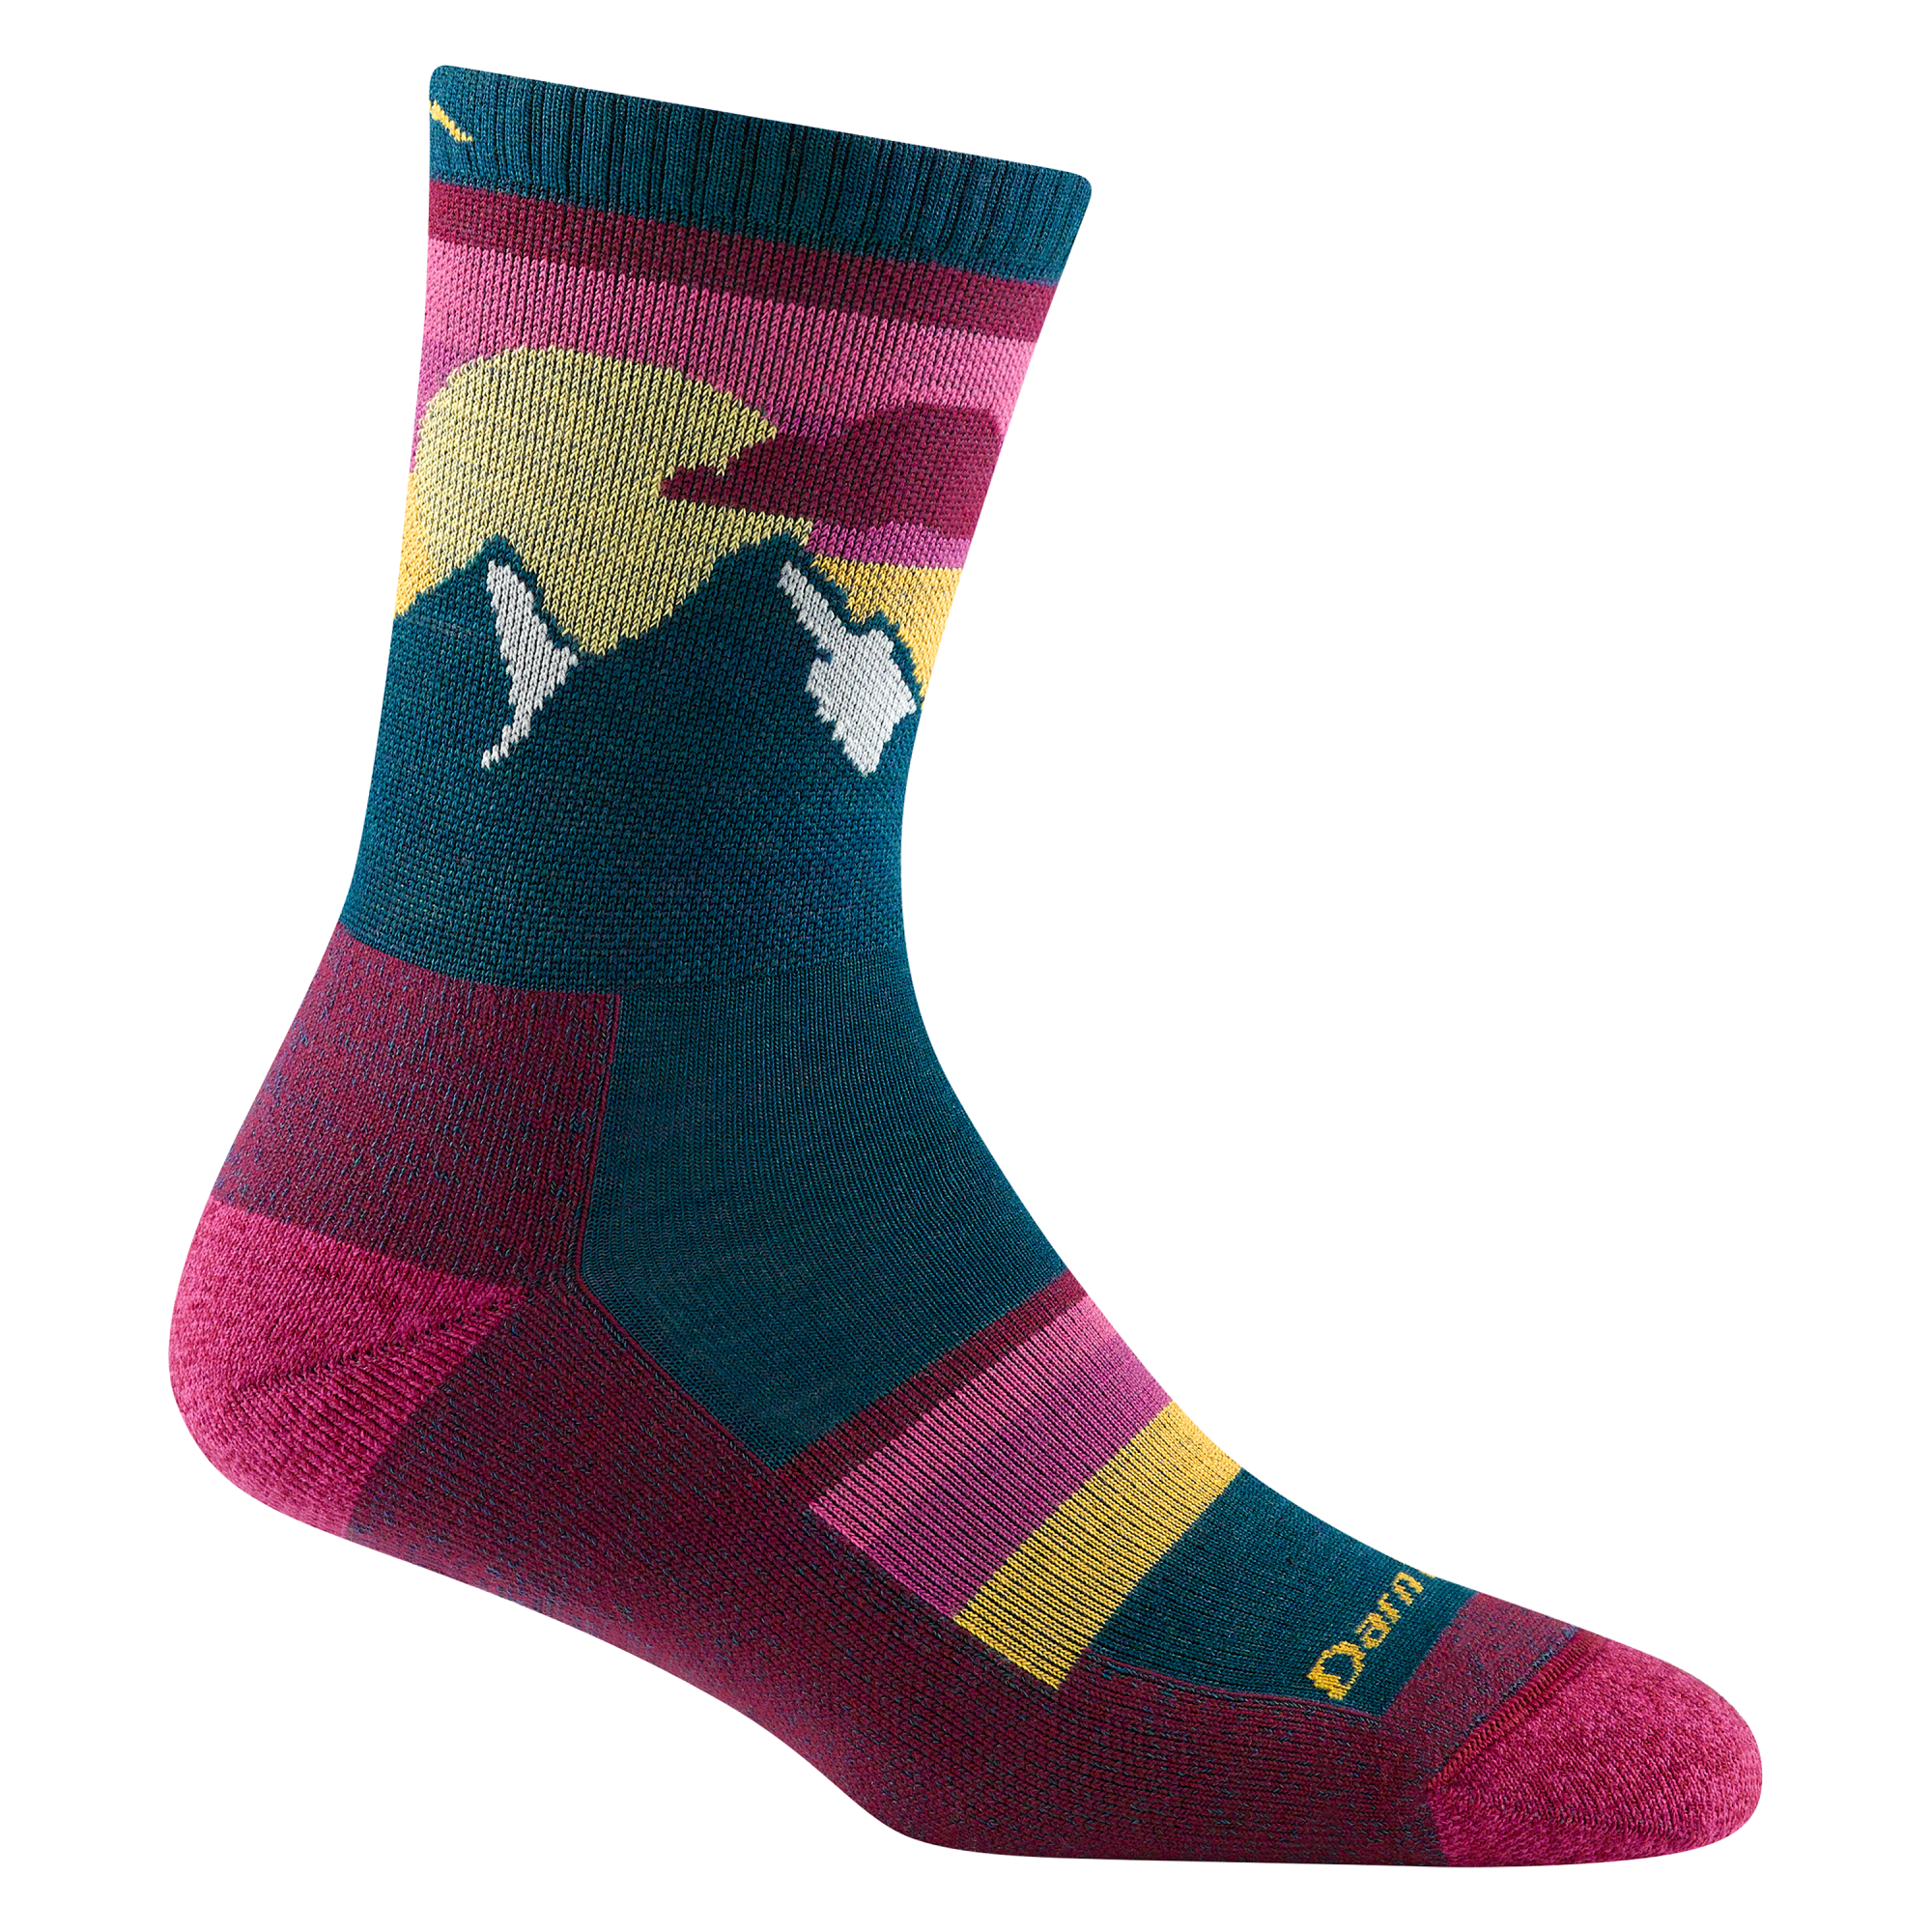 5005 women's sunset ledge micro crew hiking sock in dark teal with pink toe/heel and yellow to pink sunset with mountain